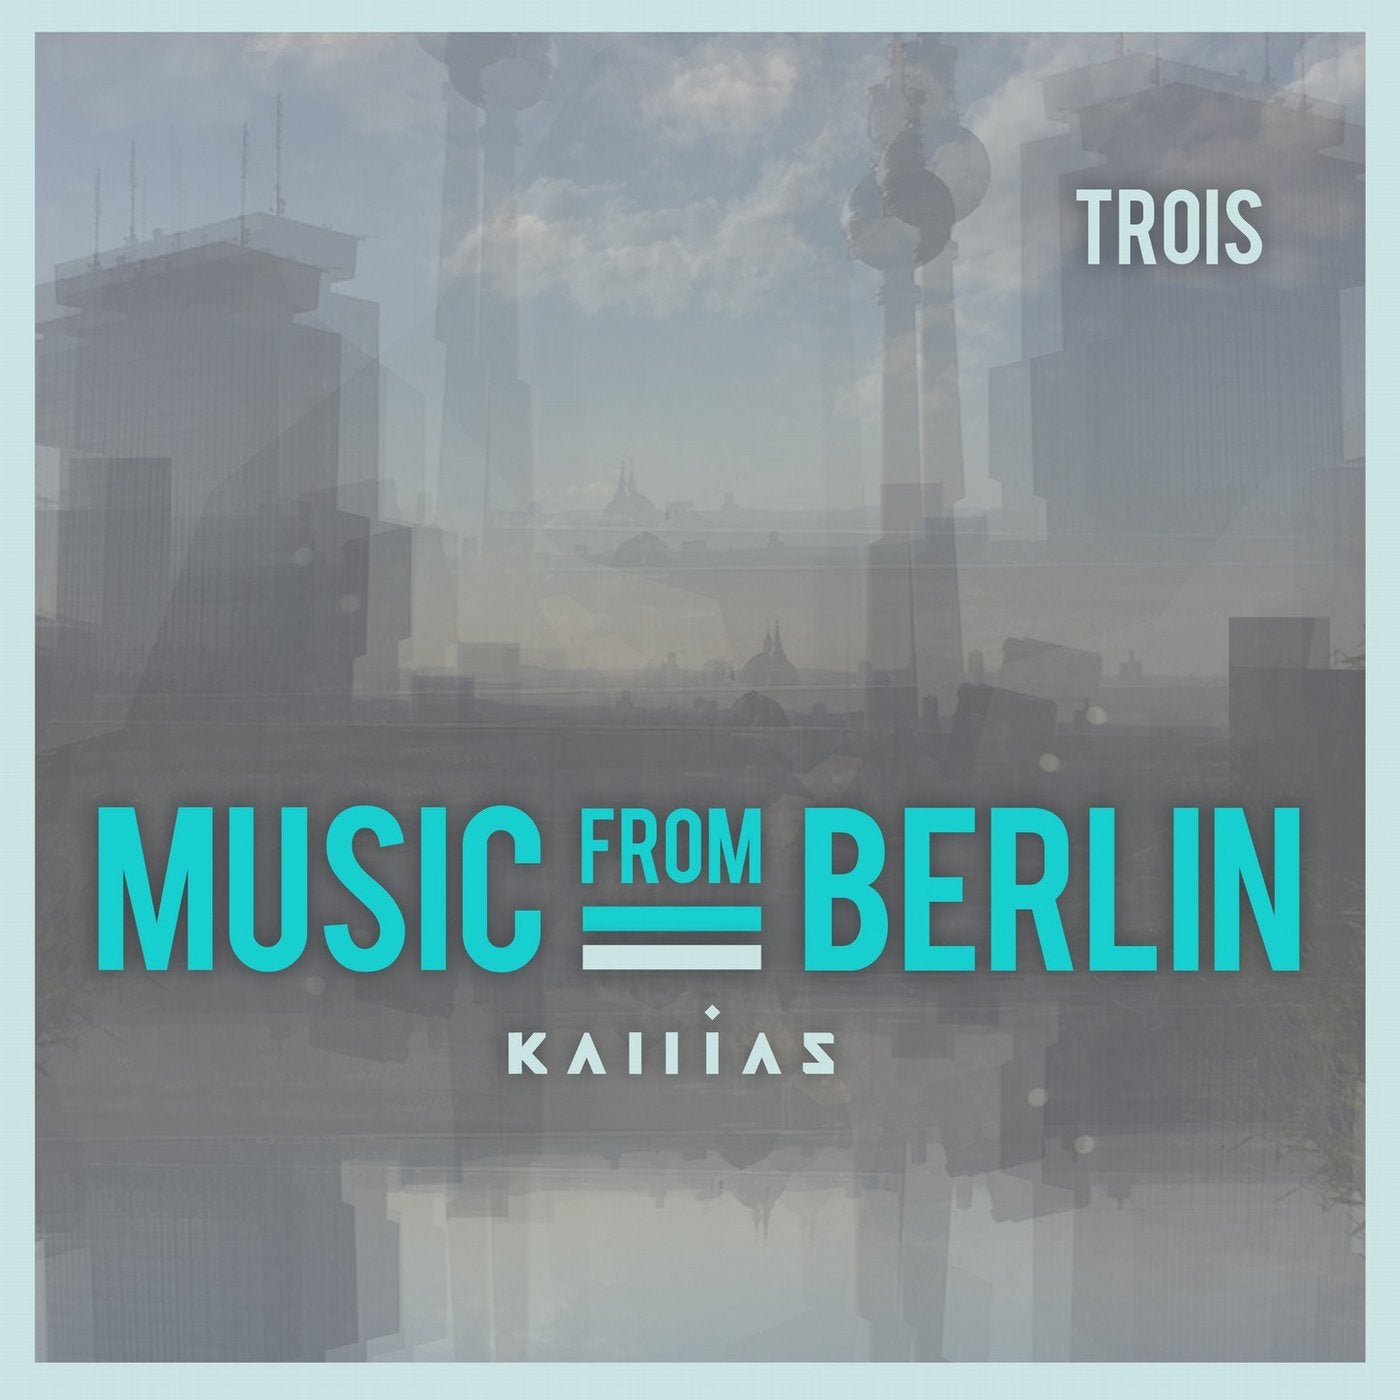 Music from Berlin - Trois